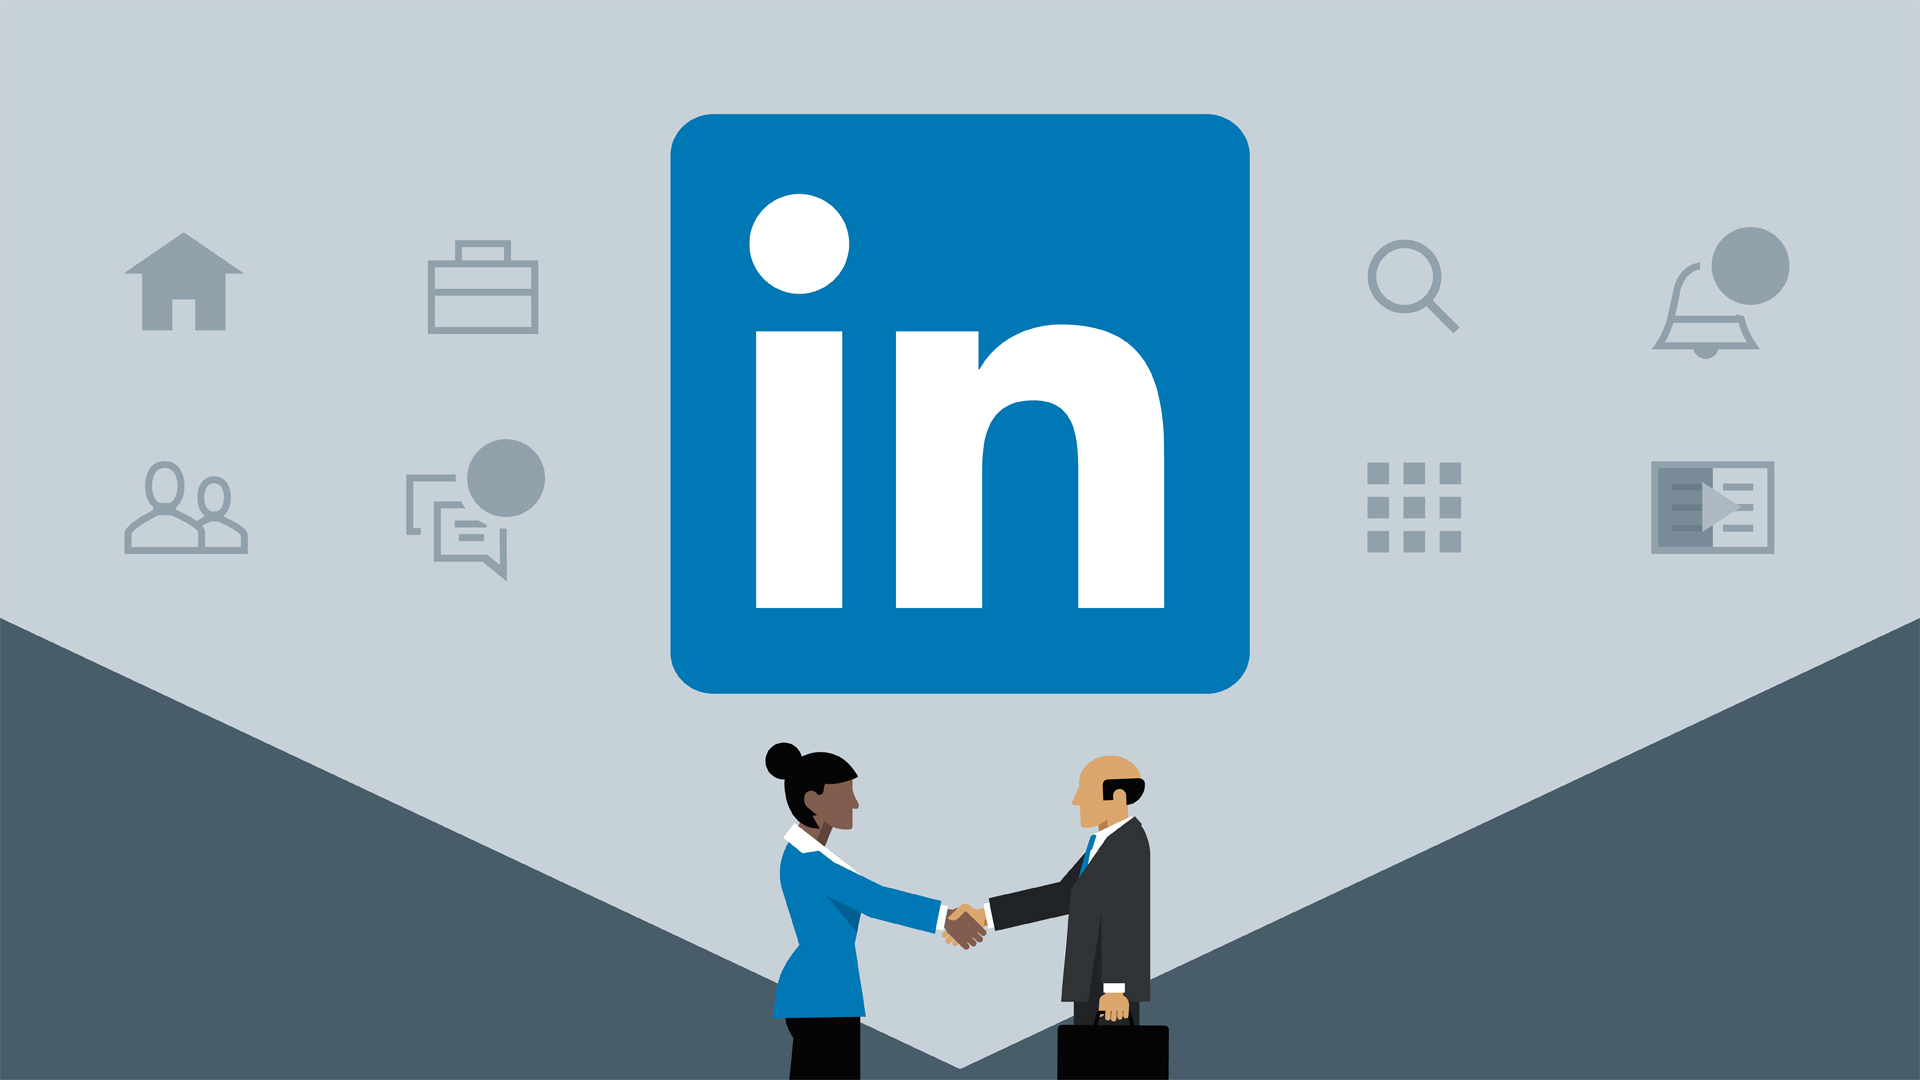 What impact has LinkedIn had on your business?